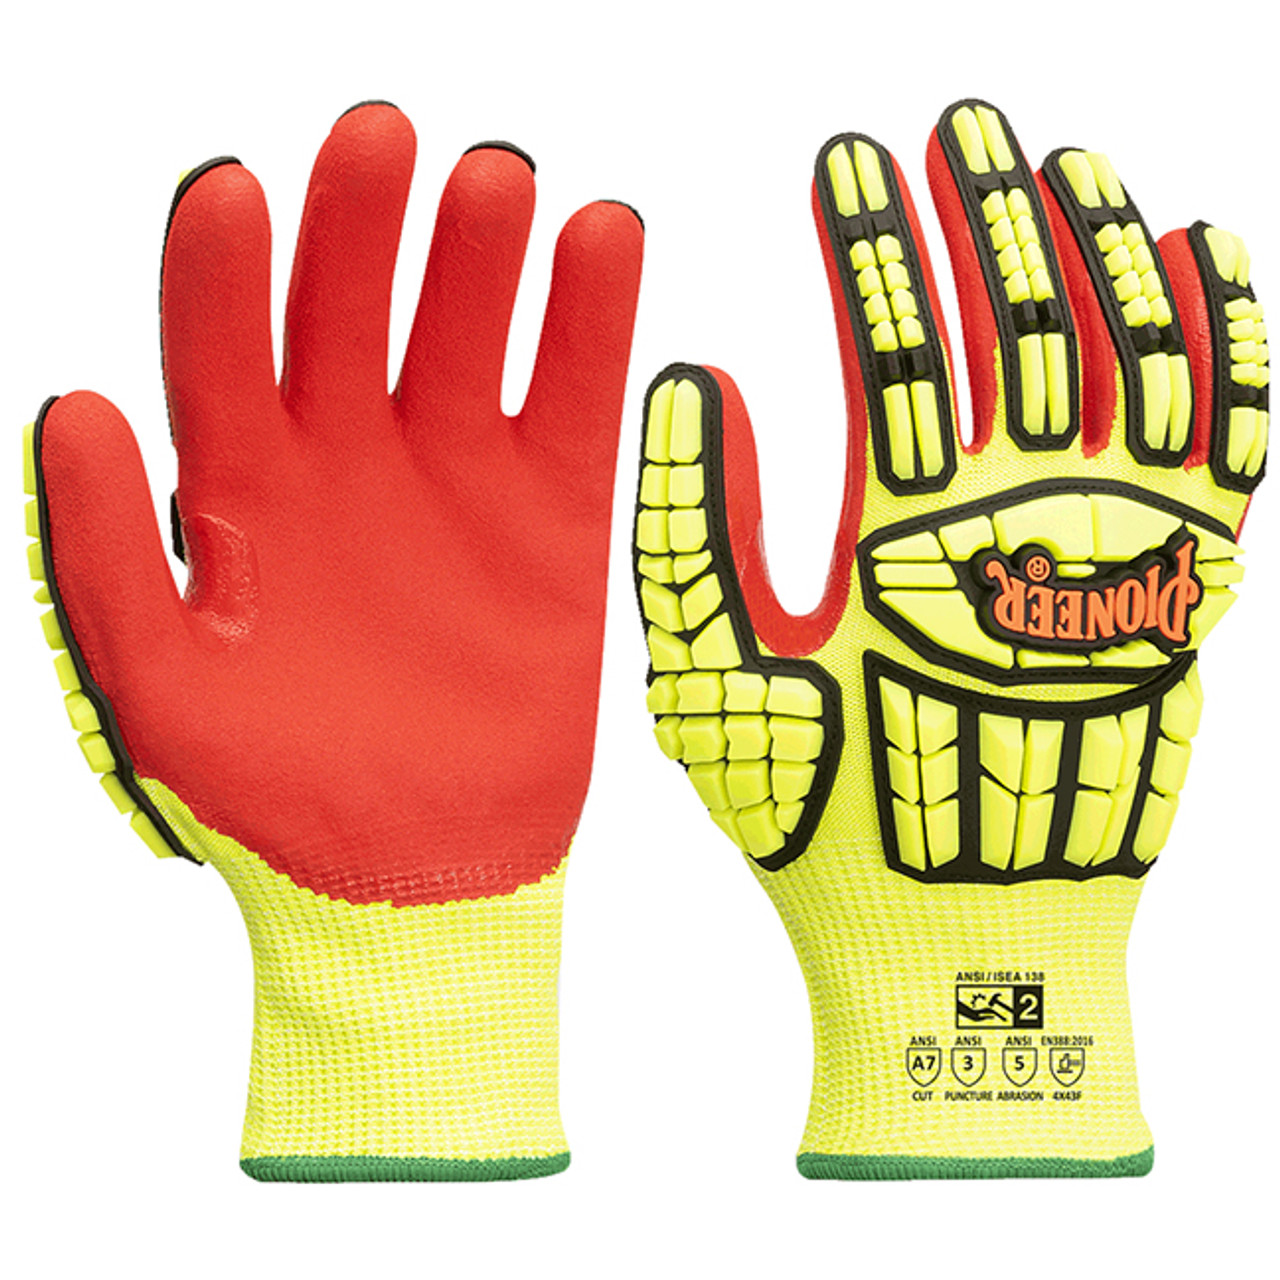 https://cdn11.bigcommerce.com/s-4208f/images/stencil/1280x1280/products/31647/18365/Pioneer-5364-Cut-and-Impact-Resistant-Gloves-with-TPR-Level-A7__75454.1675723196.jpg?c=2